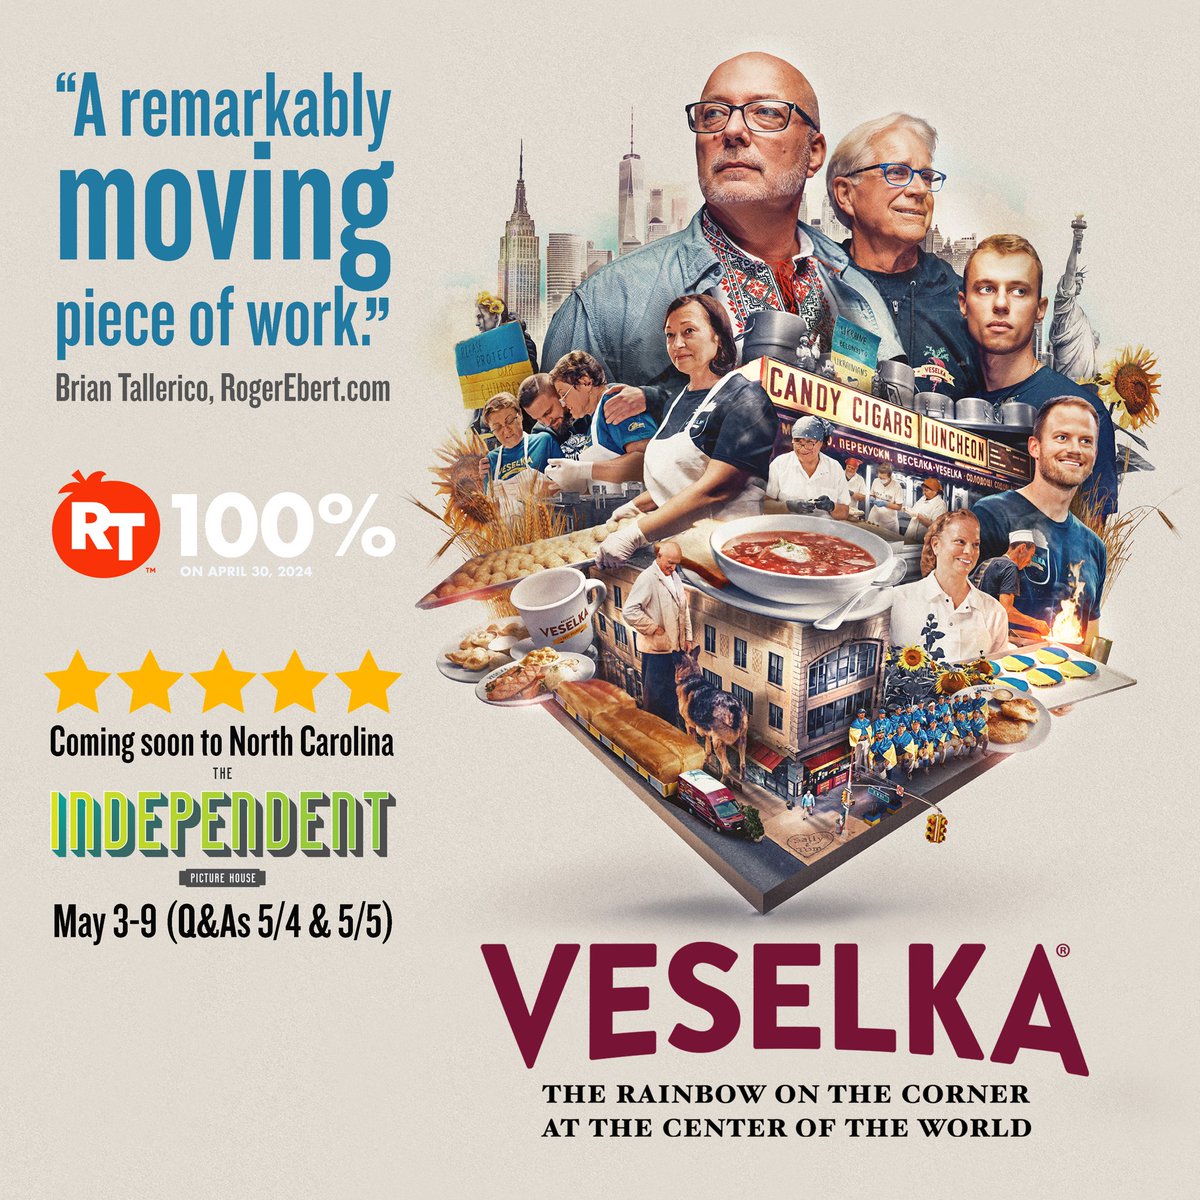 @VeselkaMovie will play in #CharlotteNorthCarolina at The Independent Picture House (@IPH_clt) May 3-9. See what happens when people unite to support Ukraine across 70 years in the @veselkamovie. Q&As with writer/director (5/4 at 7pm; 5/5 at 1pm)! Tix: independentpicturehouse.org/movies/veselka…